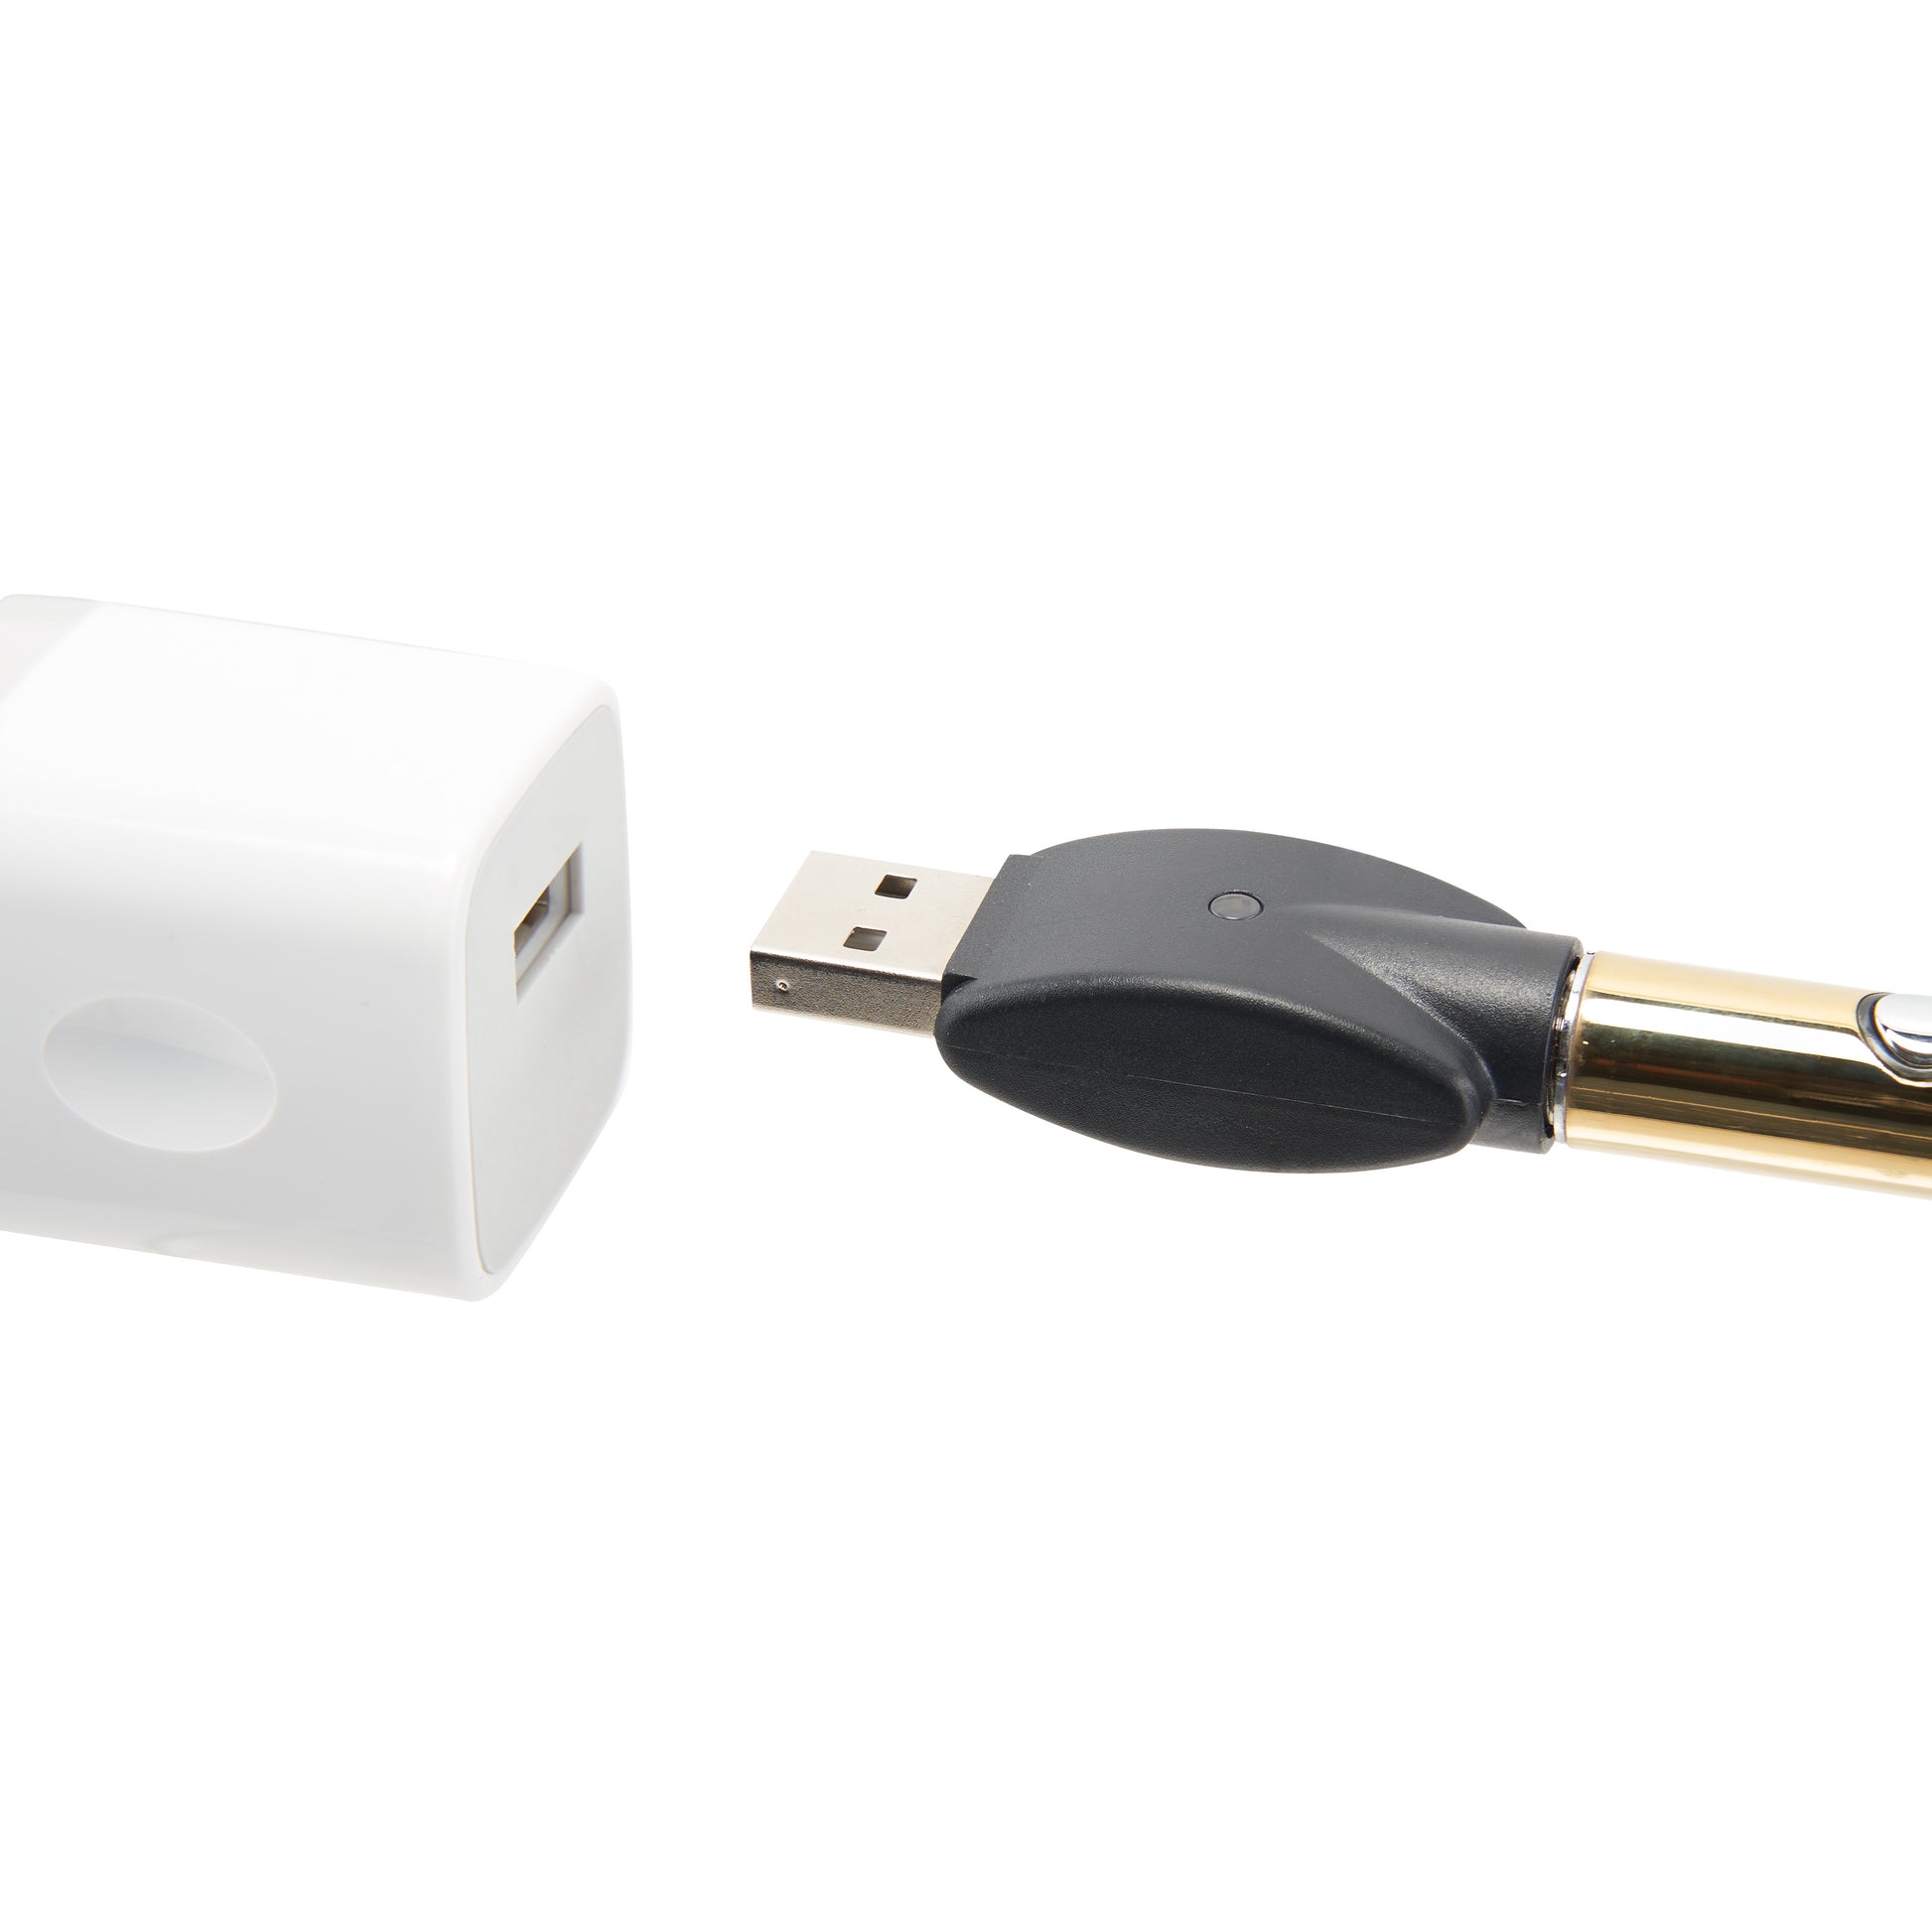 The gold Ooze Wink LED vape pen is plugged into the 510 charger, being plugged into a white square USB wall adapter